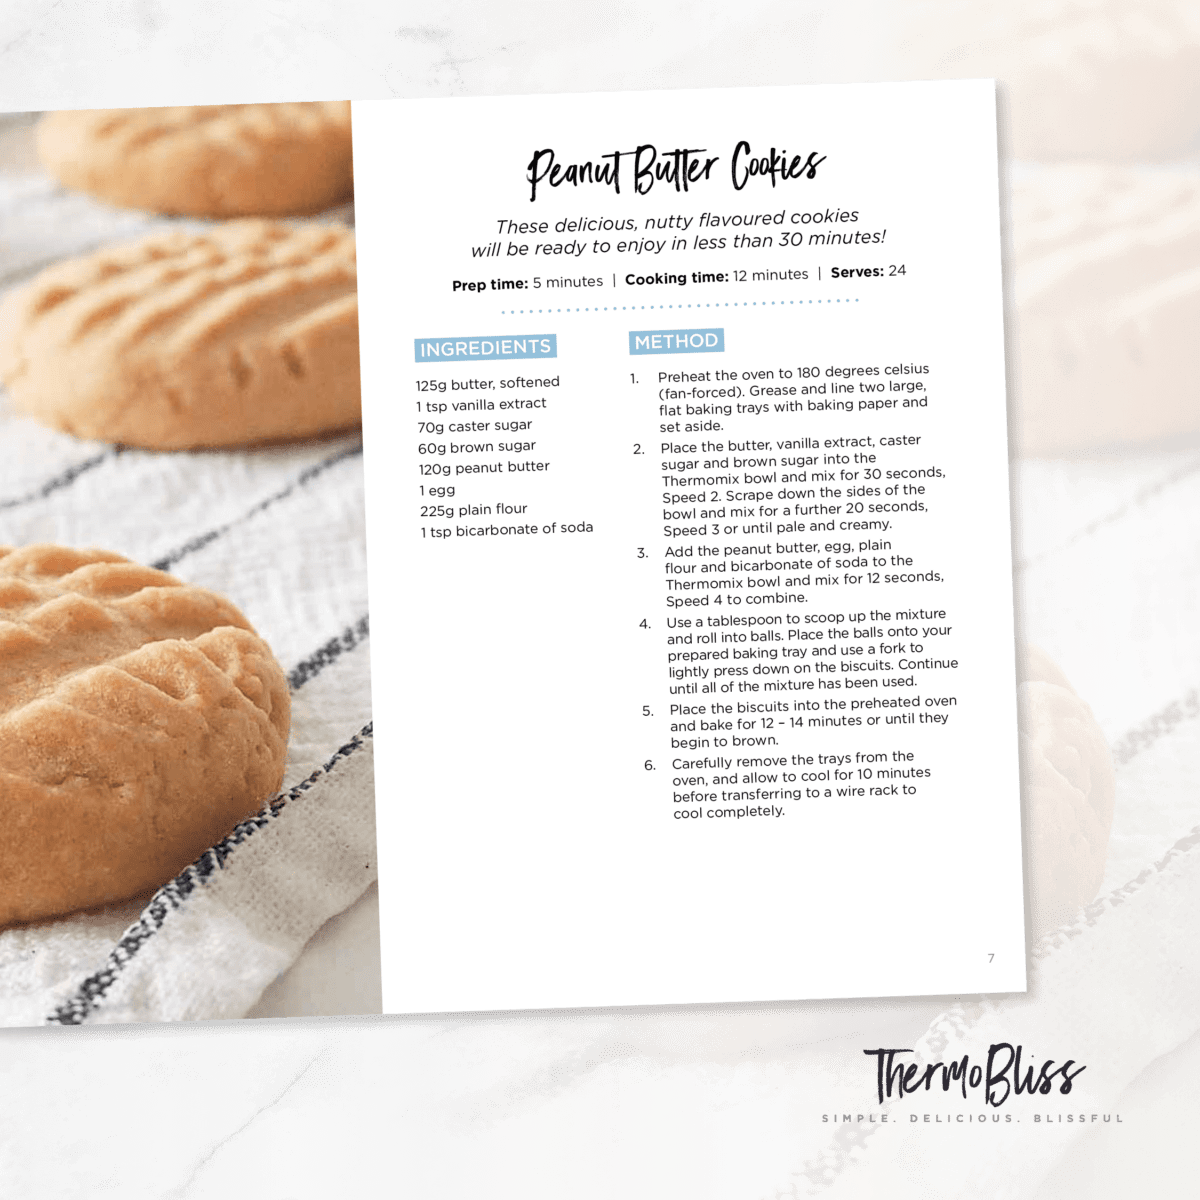 Image of Peanut Butter Cookies recipe from Thermomix Cookies & Slices Cookbook.